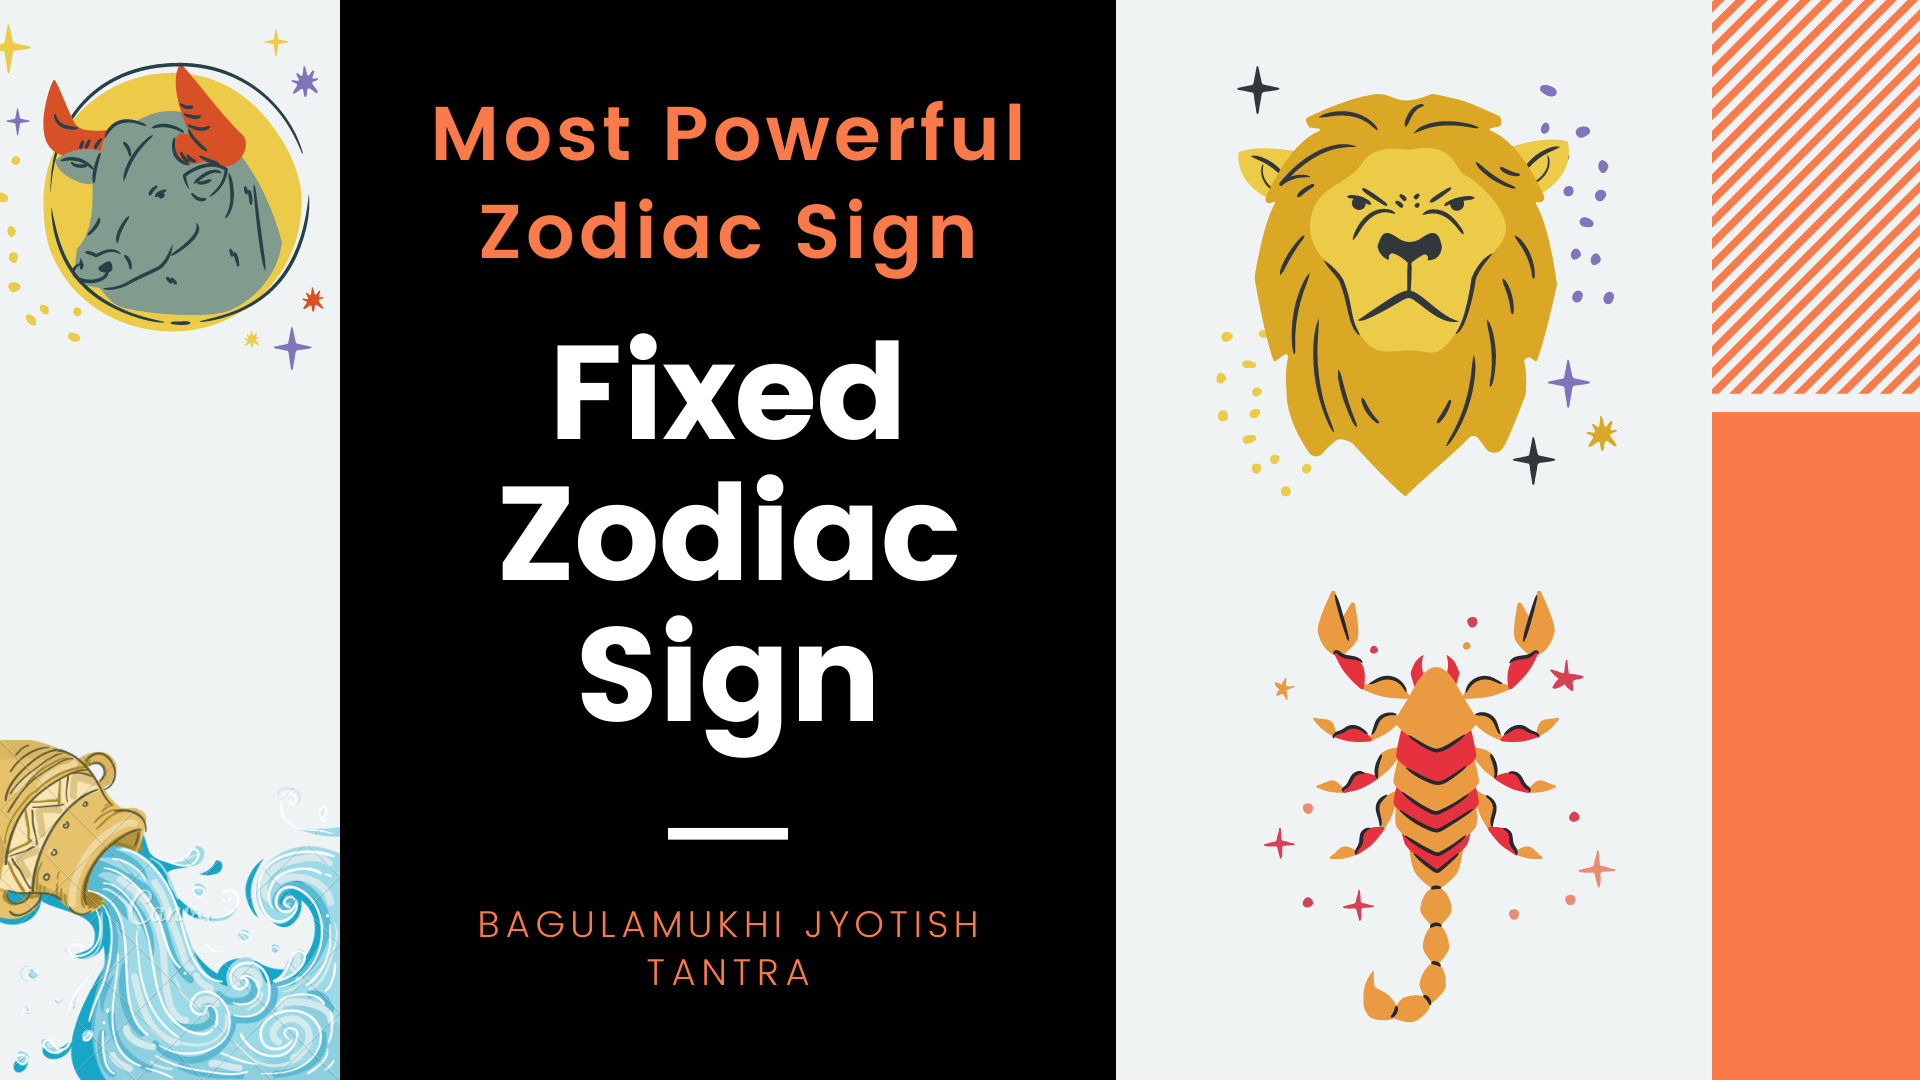 Zodiac the sign powerful which is most The 5